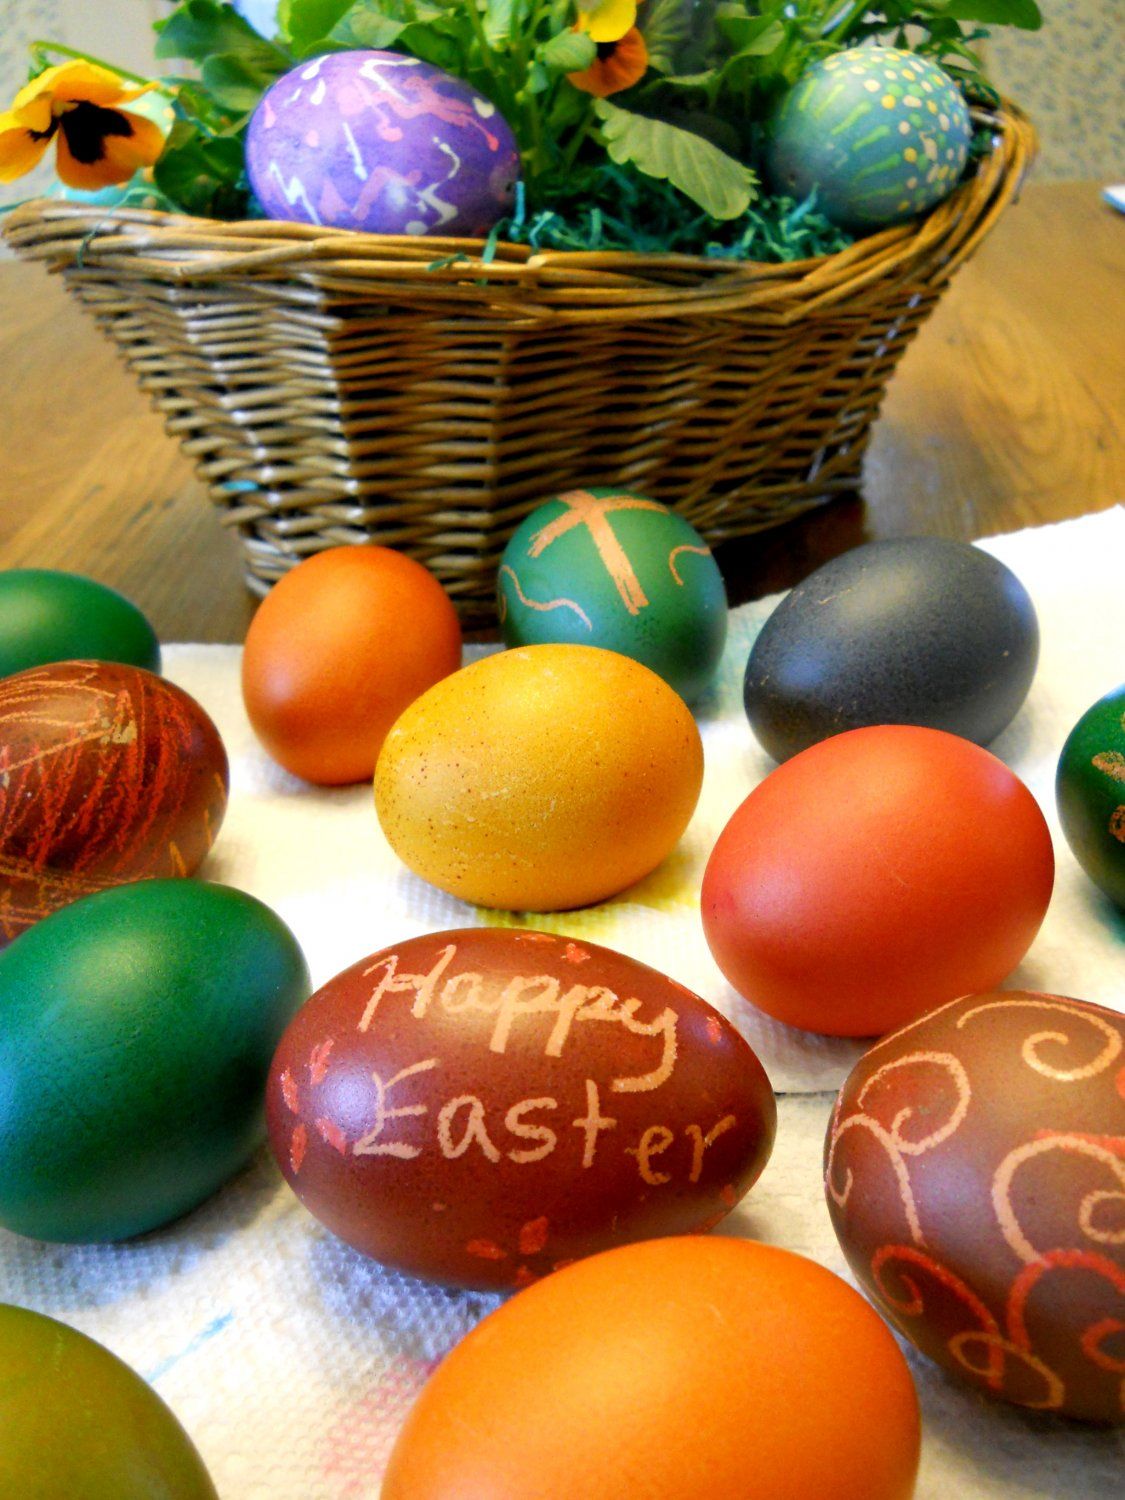 Spring, Easter, and Eggs